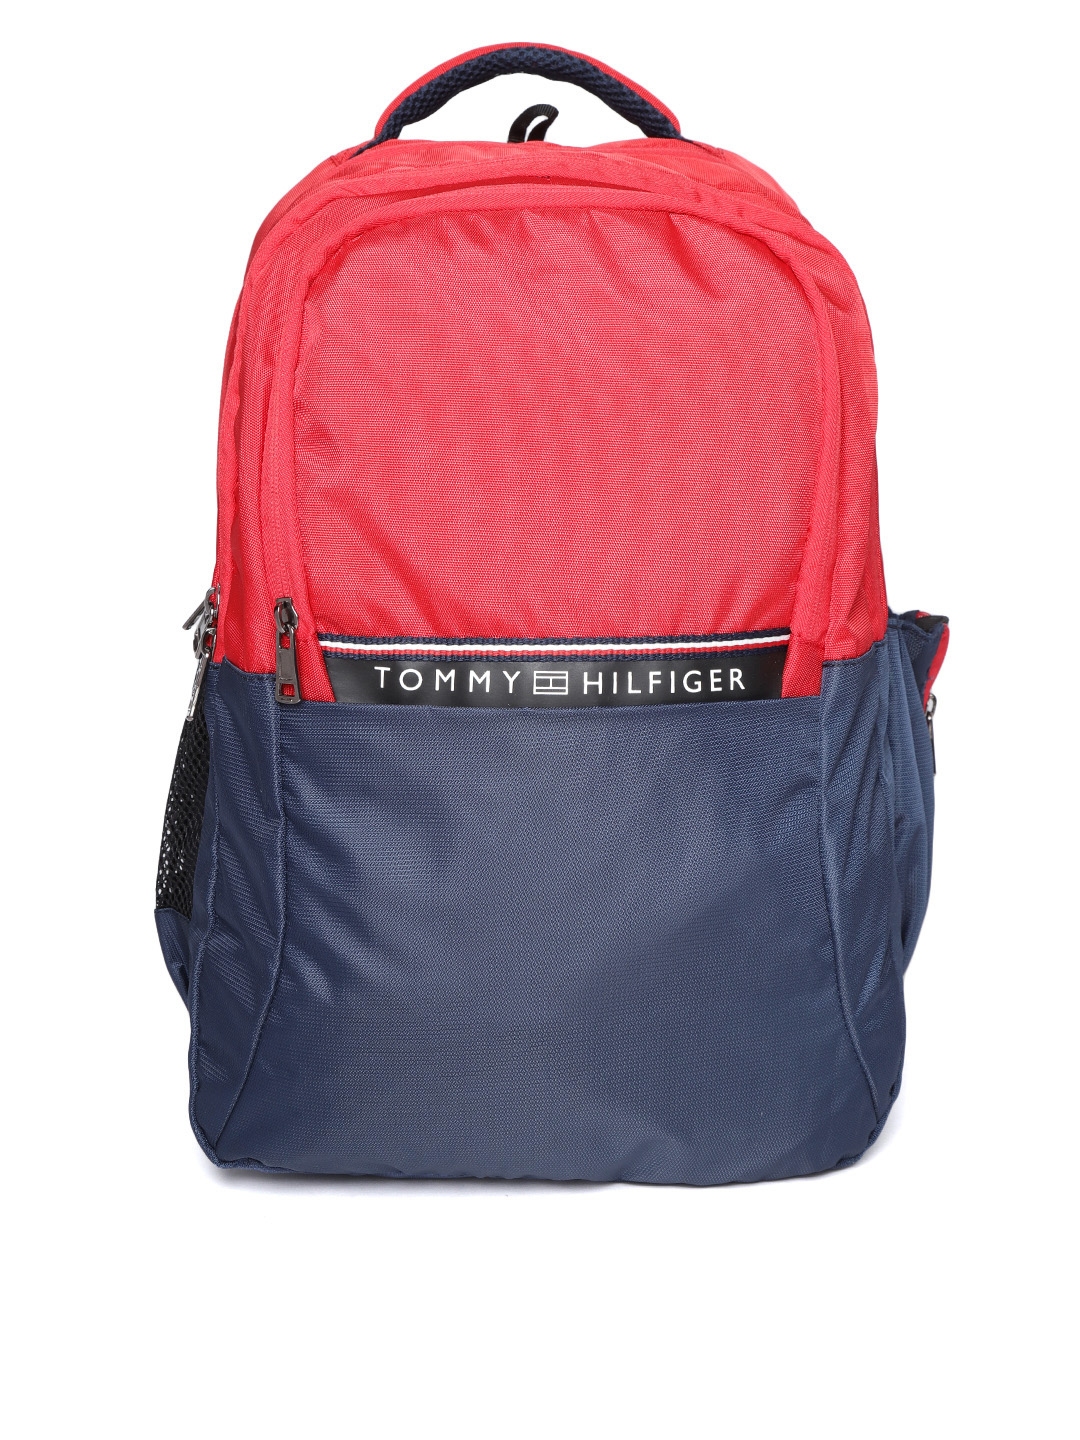 Buy Tommy Hilfiger Unisex Red & Navy Blue Colourblocked Backpack ...